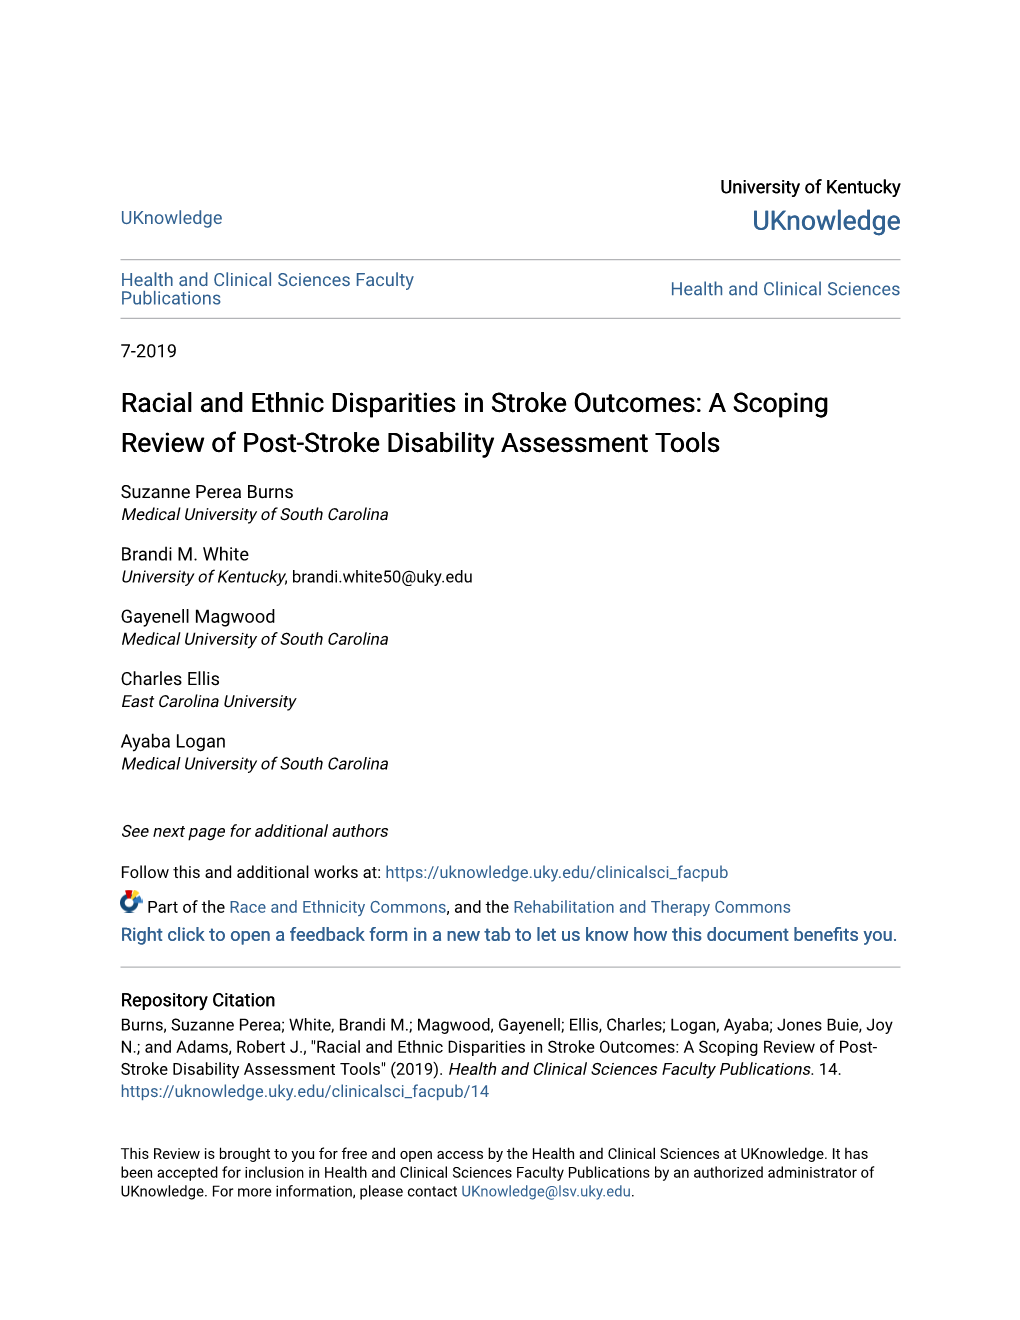 Racial and Ethnic Disparities in Stroke Outcomes: a Scoping Review of Post-Stroke Disability Assessment Tools